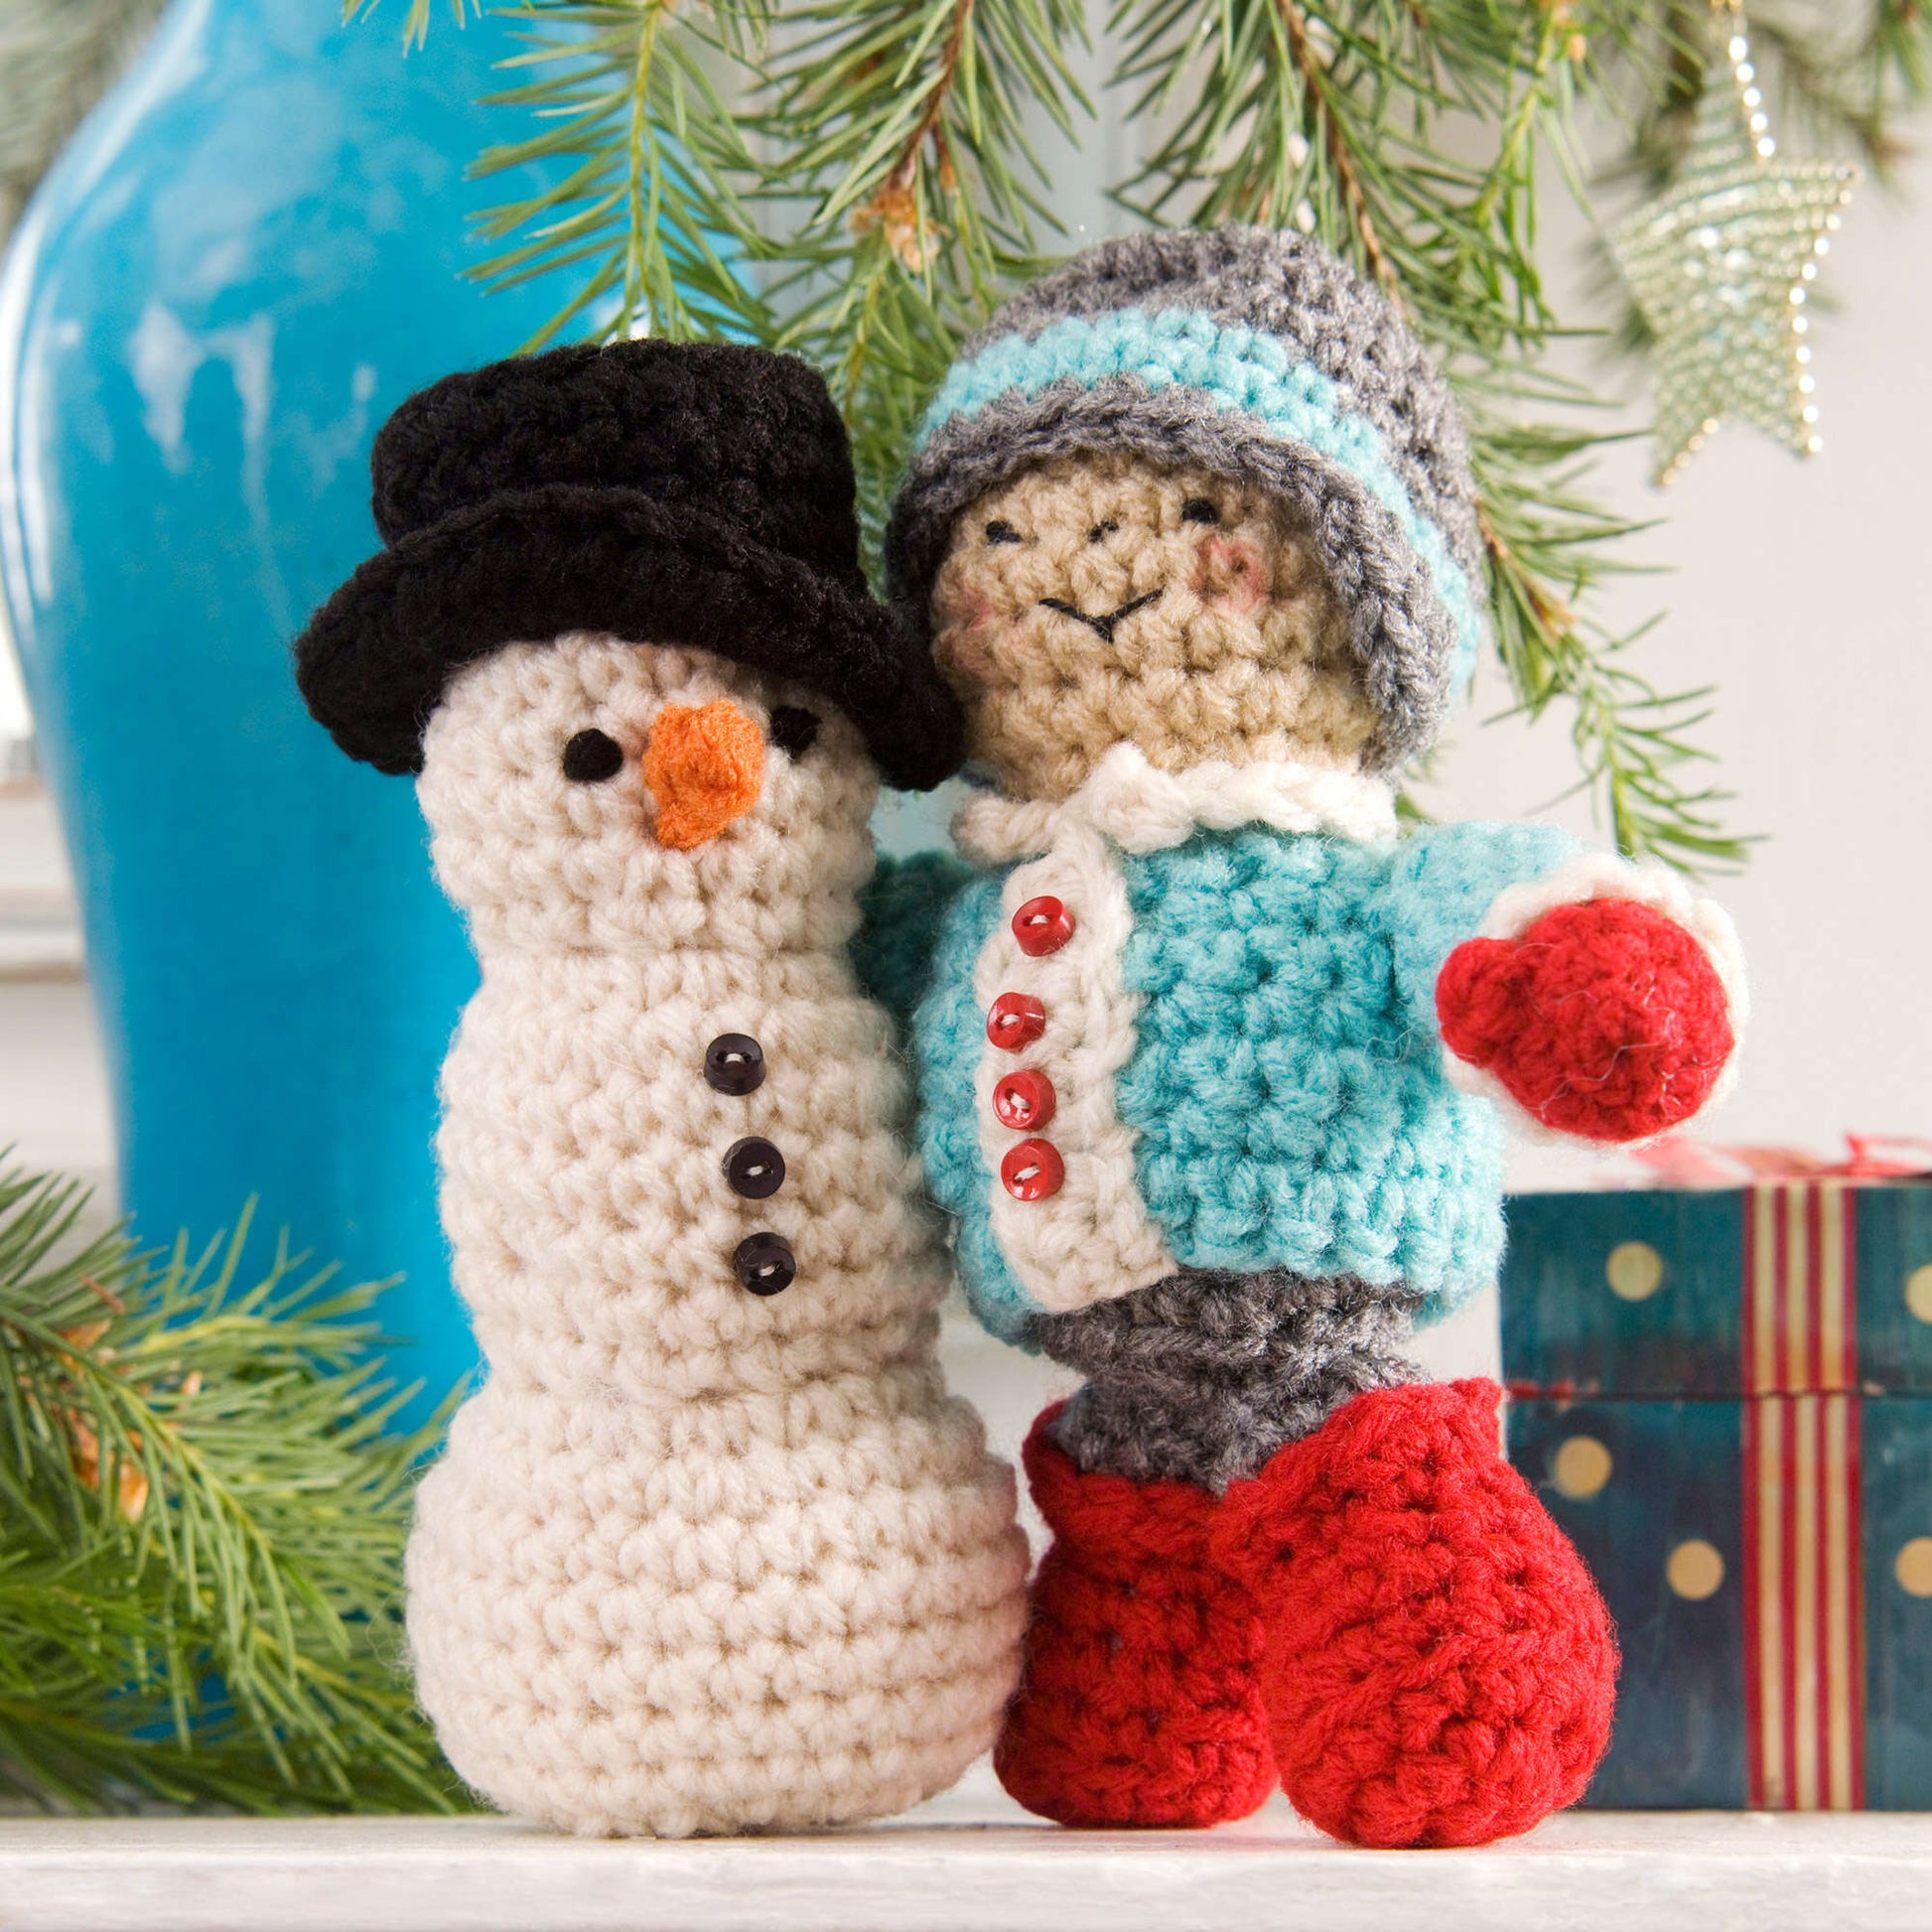 Free Red Heart Crochet His First Snowman Pattern